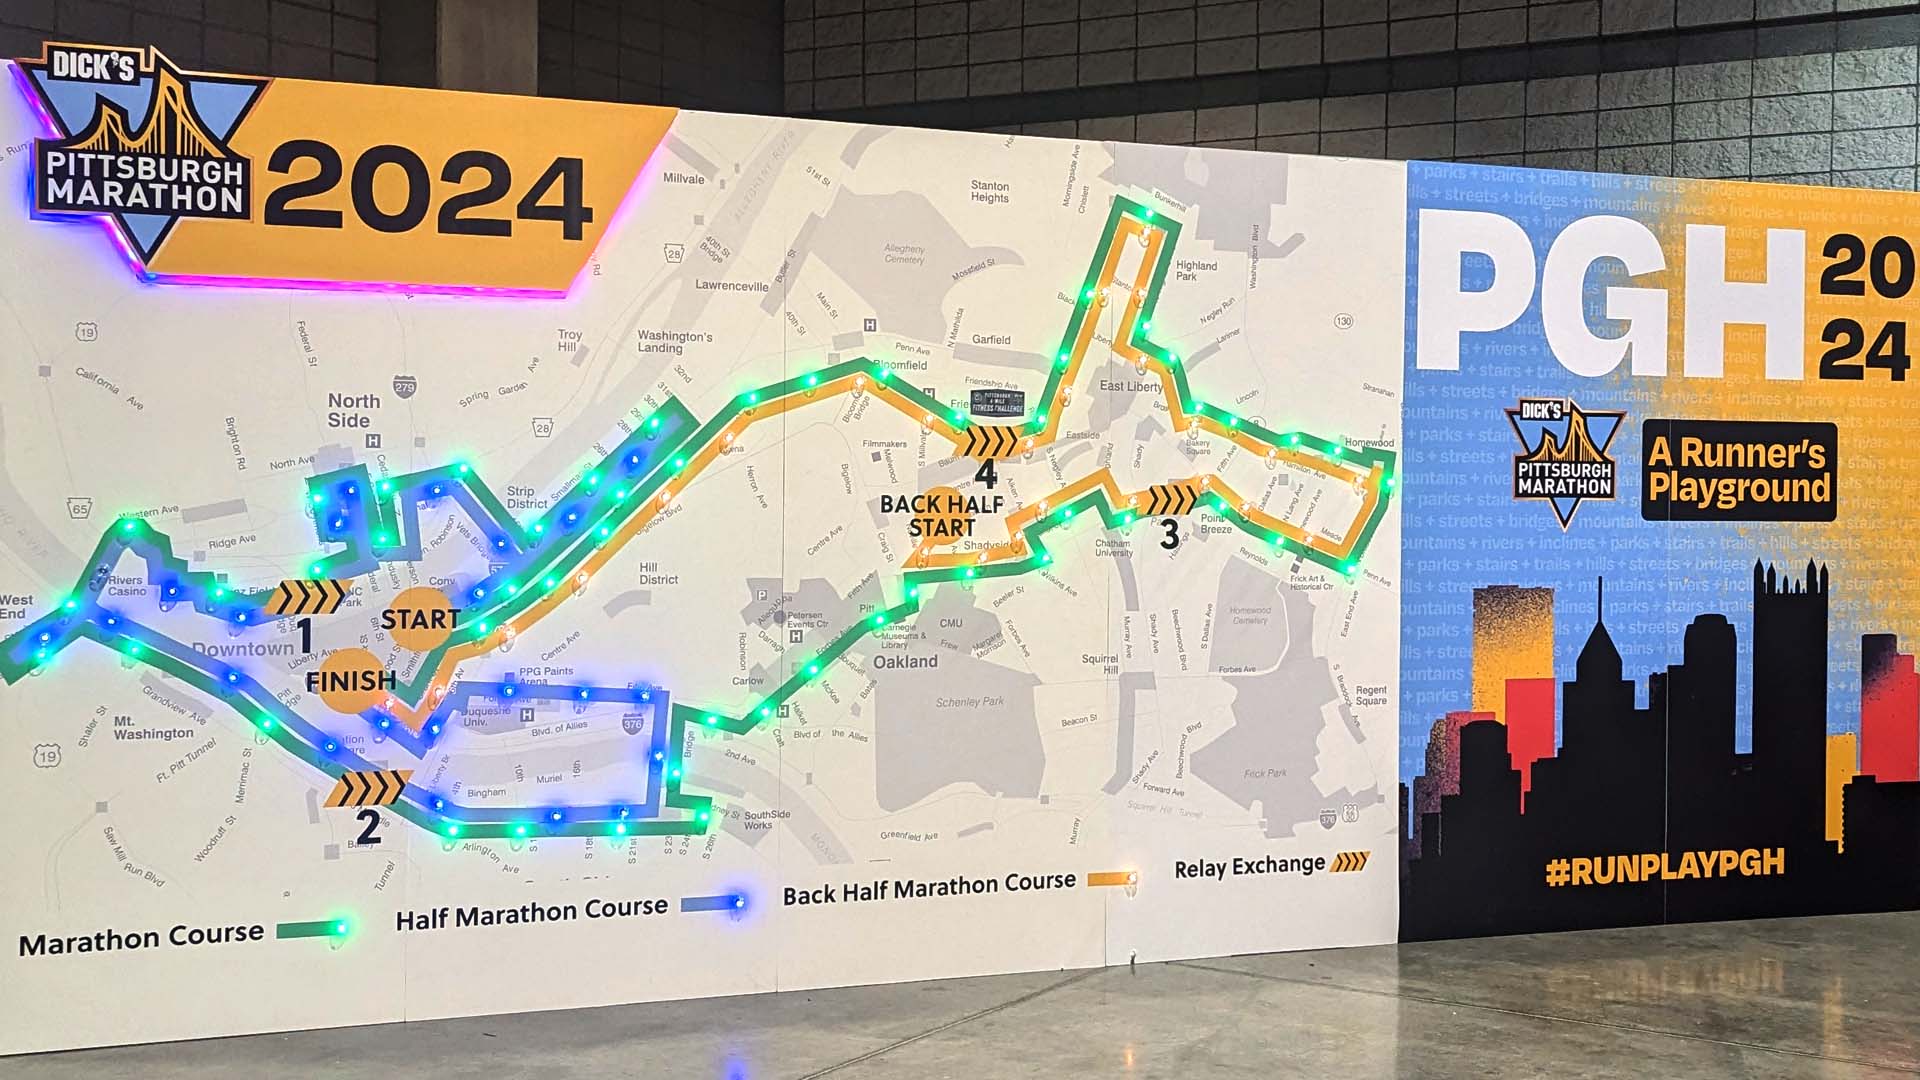 2024 Marathon branding with the race course map.